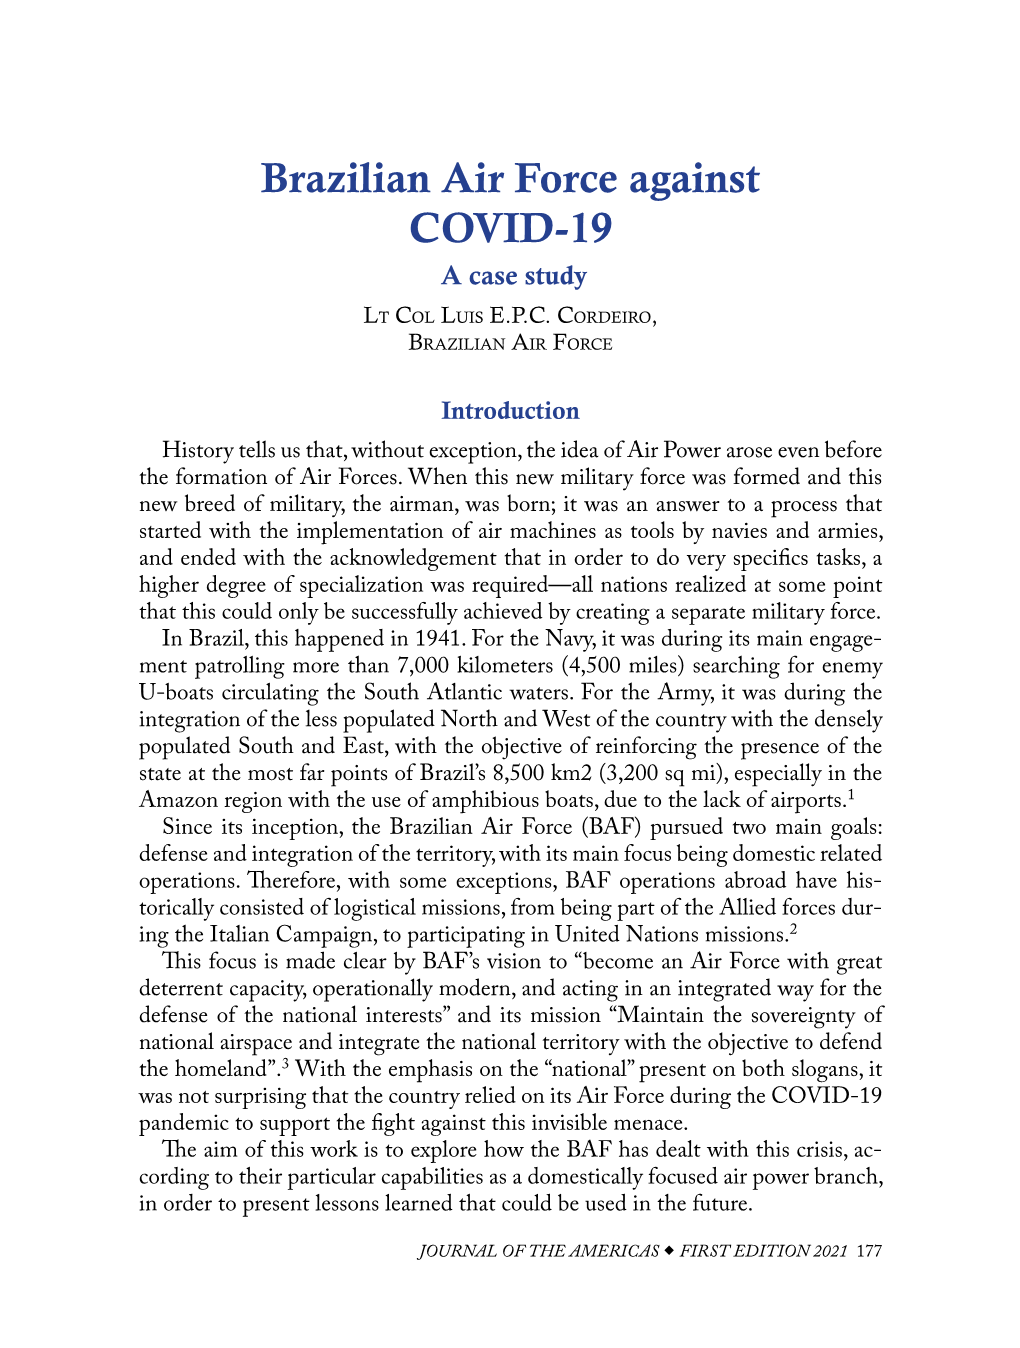 Brazilian Air Force Against COVID-19 a Case Study